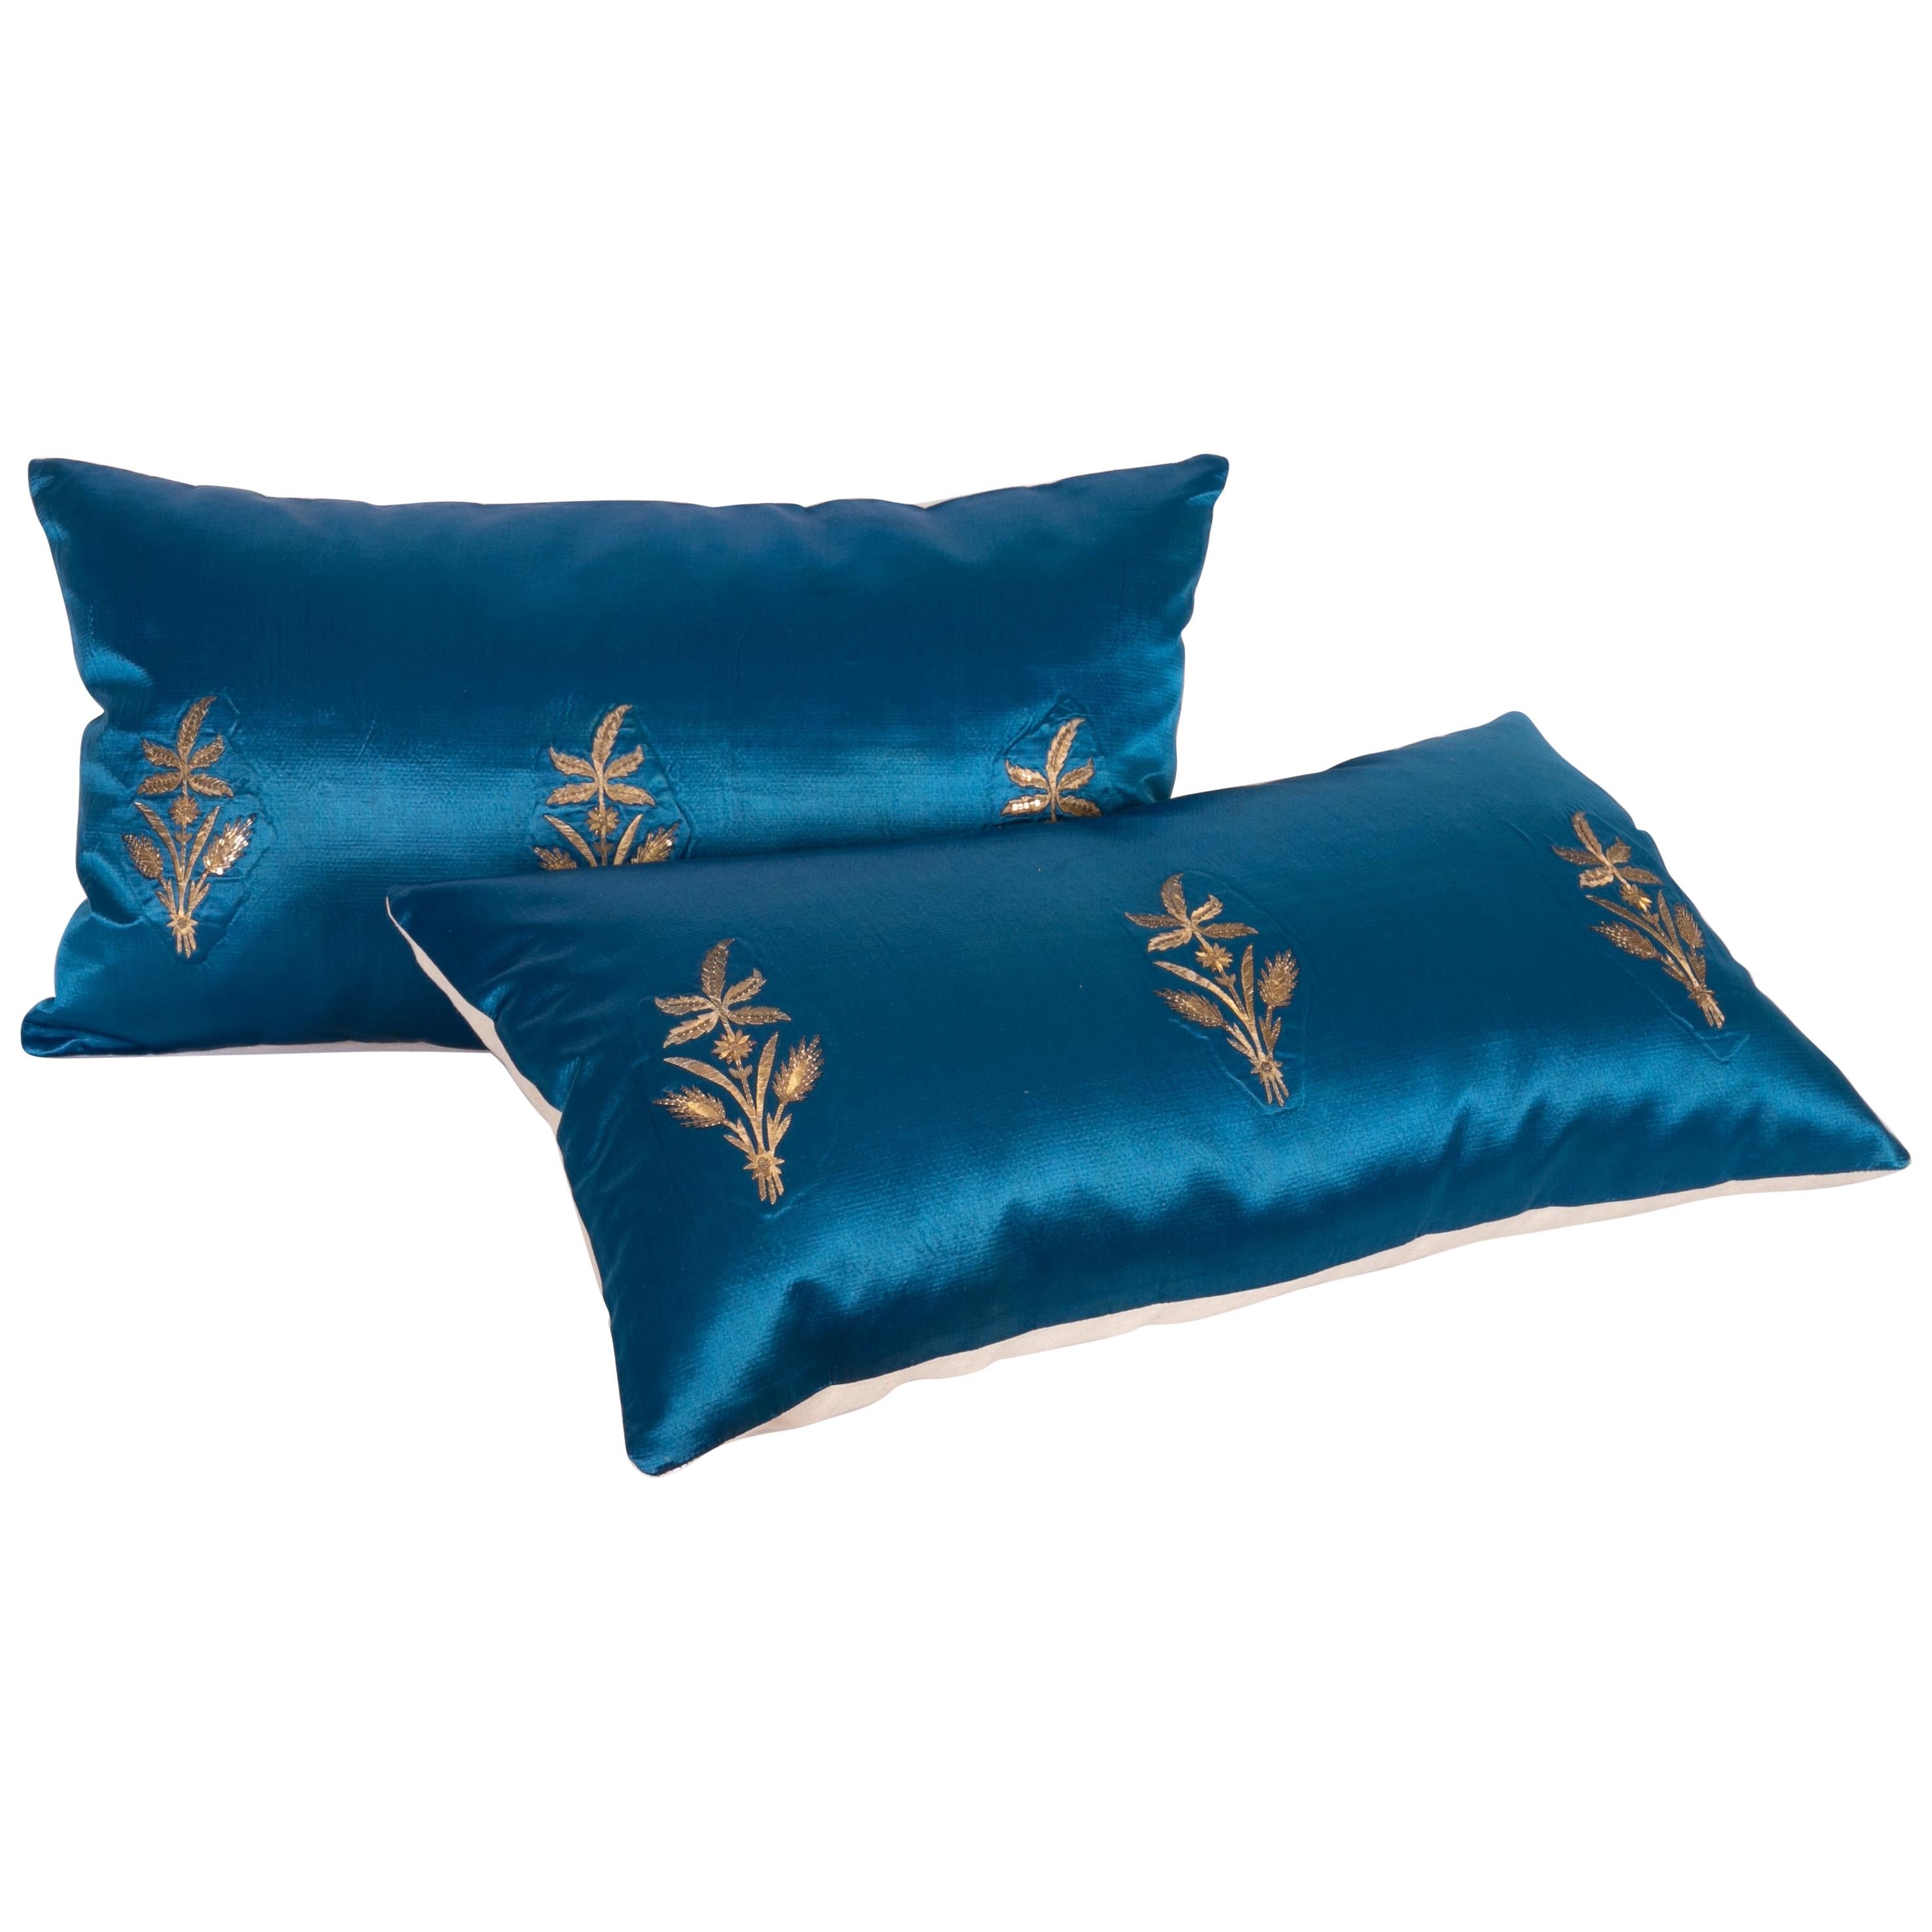 Antique Ottoman, Gold on Blue Pillow Cases, Late 19th c. For Sale